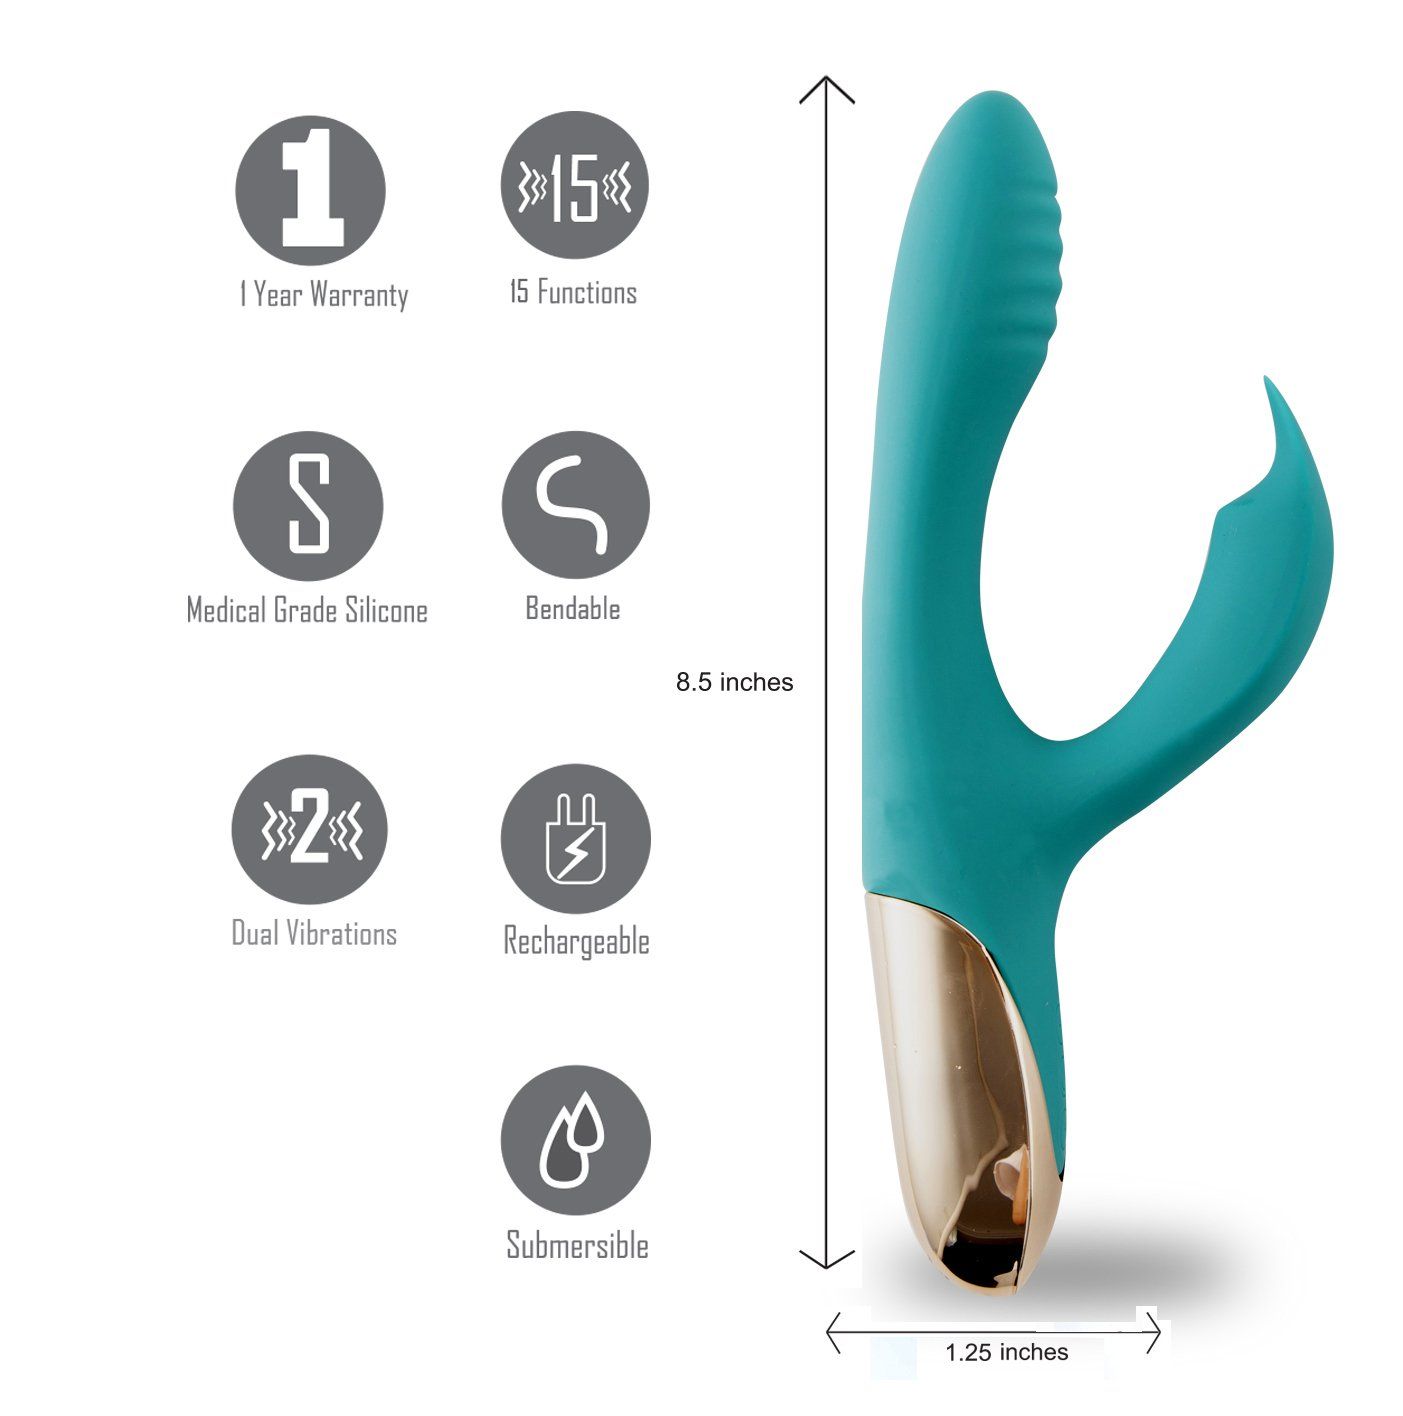 Maia - skyler rabbit vibrator - Teal, Product front view, with specifications  | Flirtybay.com.au